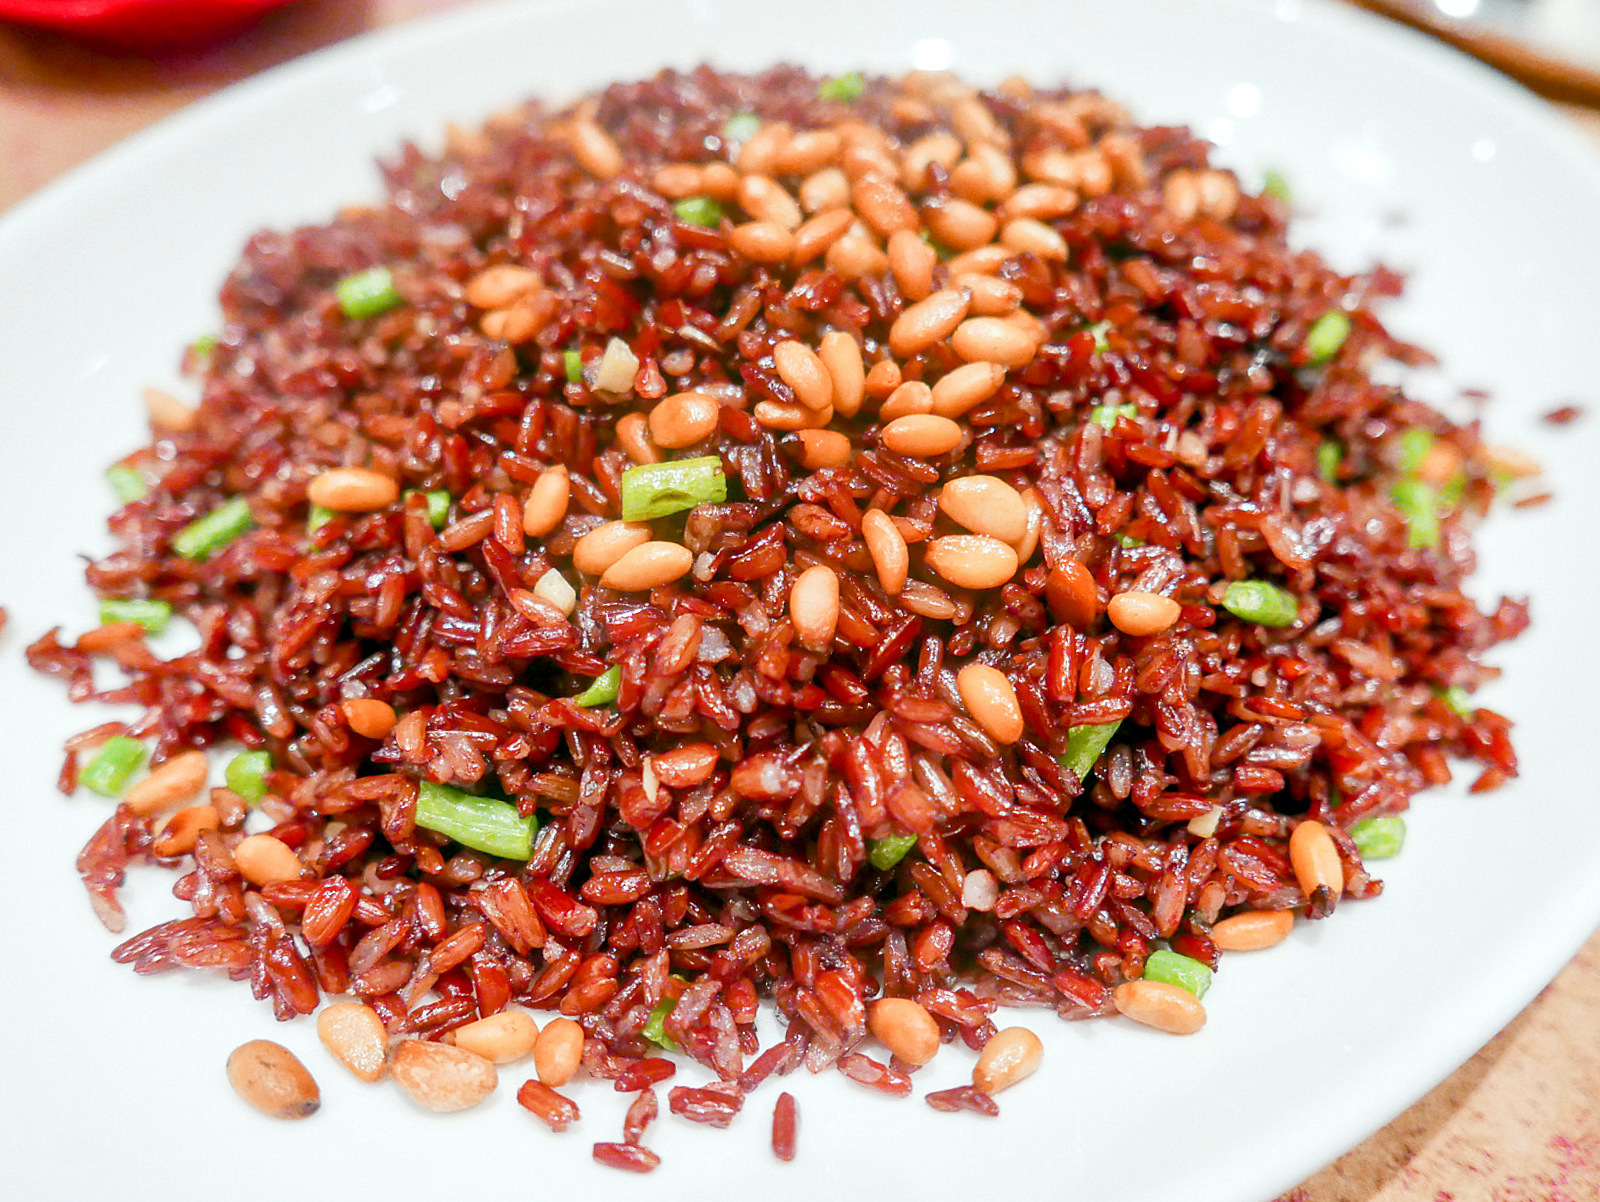 9. red rice with pine nuts, French beans, ginger & preserved veggies